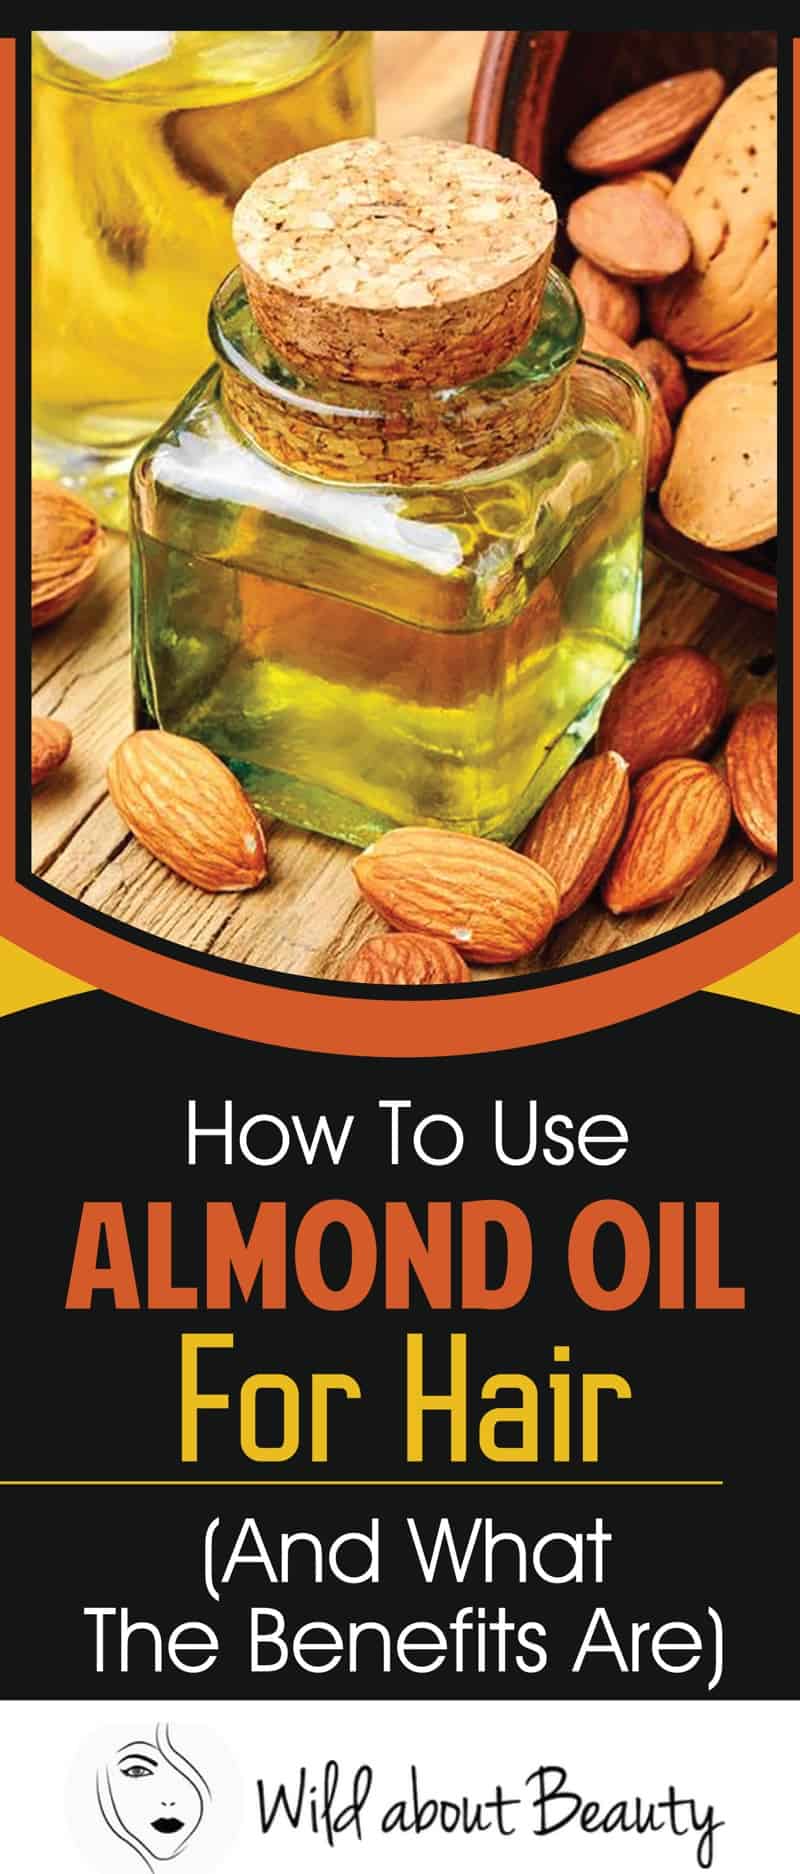 How To Use Almond Oil For Hair